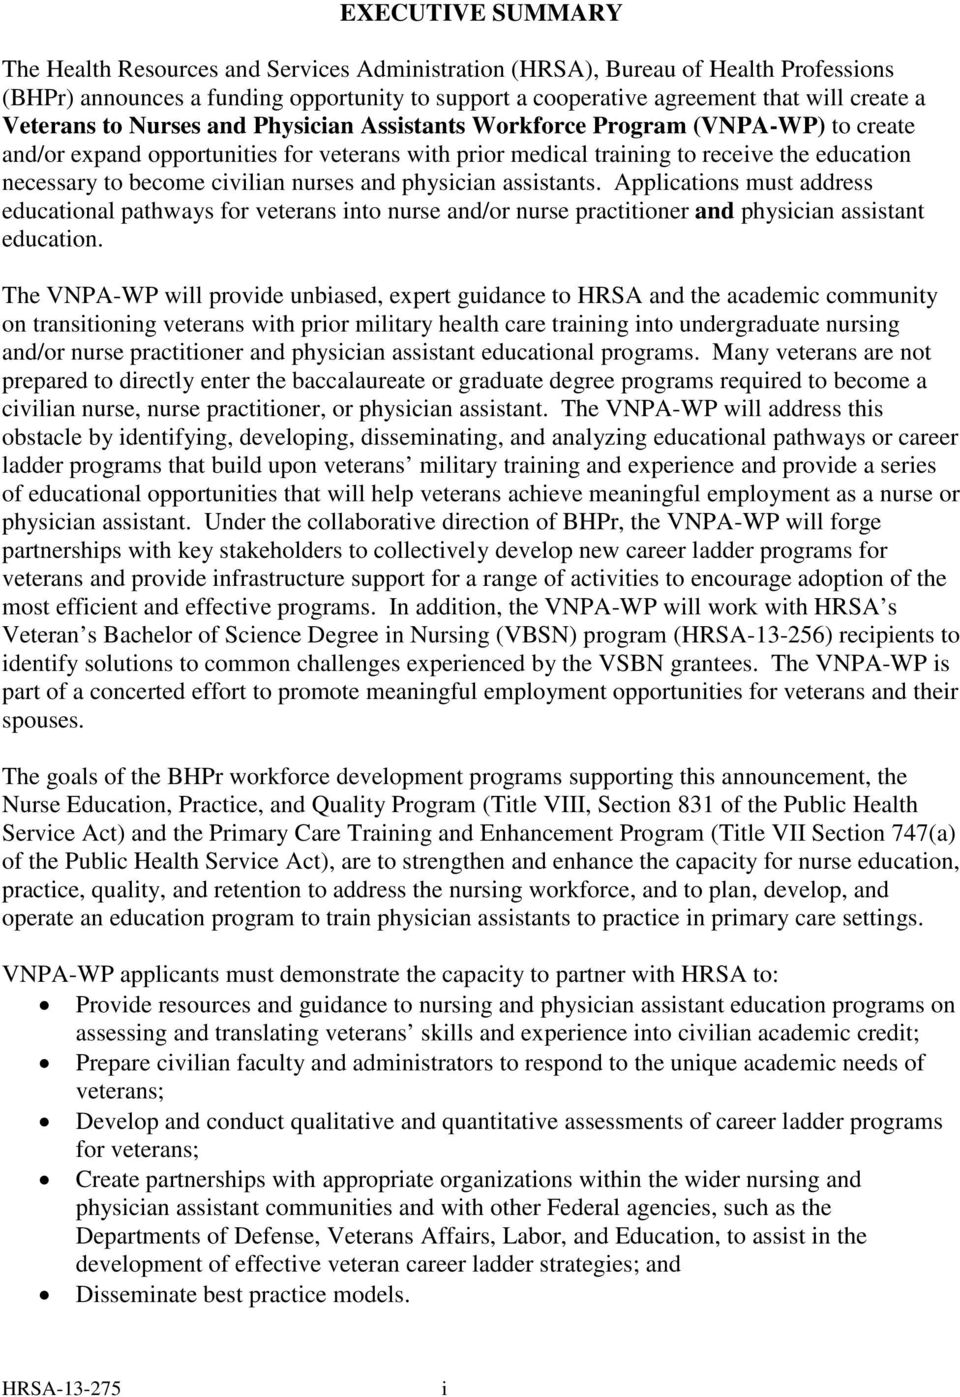 civilian nurses and physician assistants. Applications must address educational pathways for veterans into nurse and/or nurse practitioner and physician assistant education.